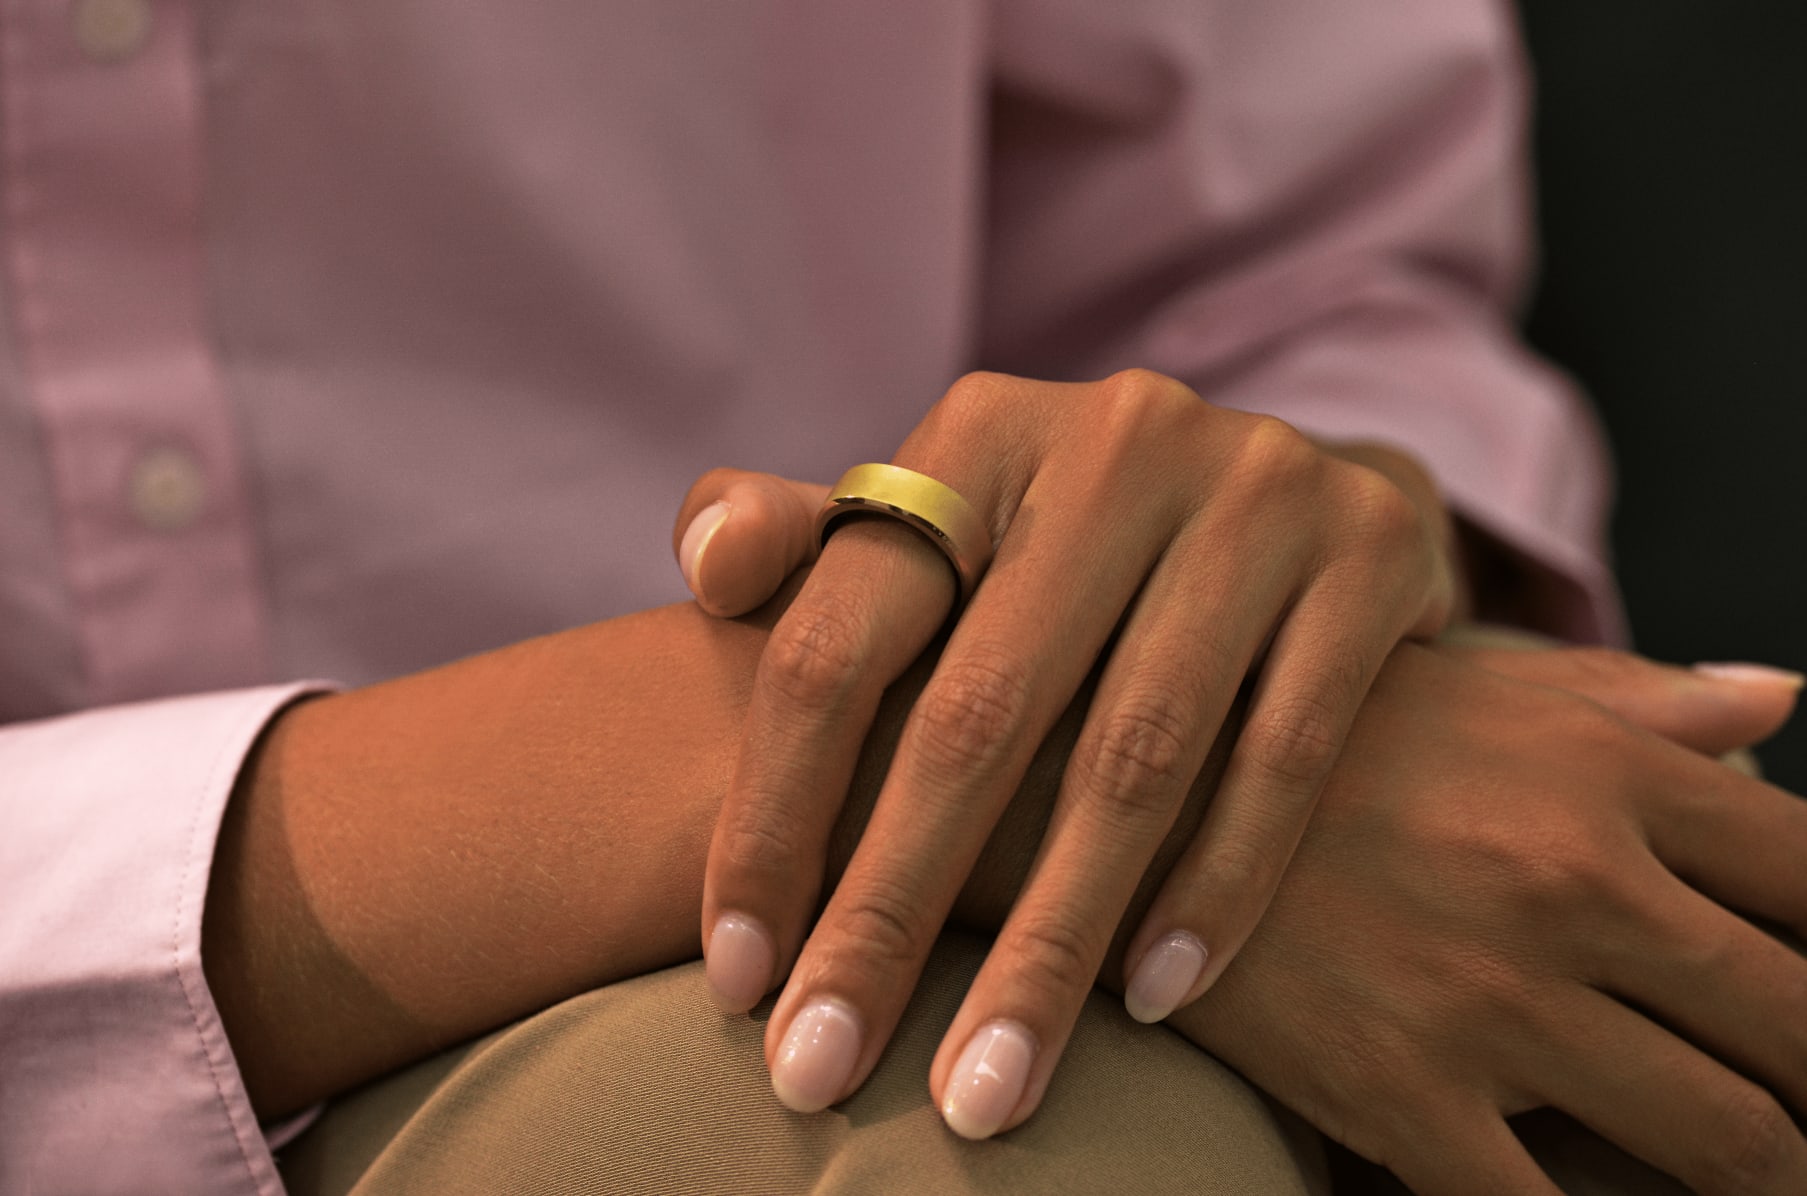 RingConn Smart Ring: Smartest Wearable for You | Indiegogo